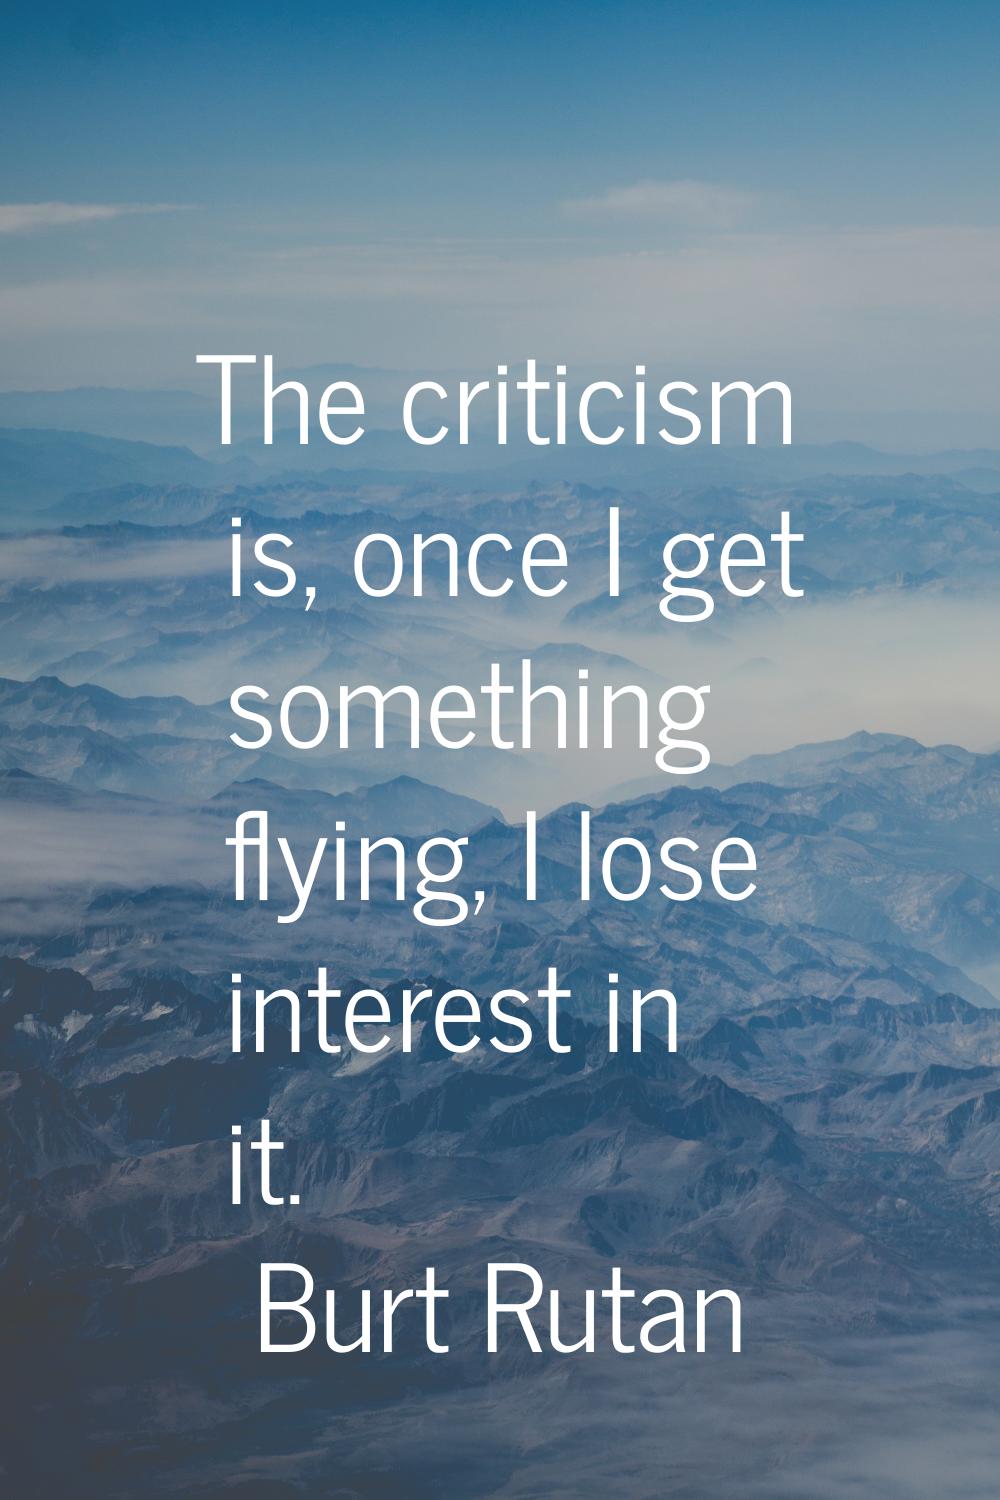 The criticism is, once I get something flying, I lose interest in it.